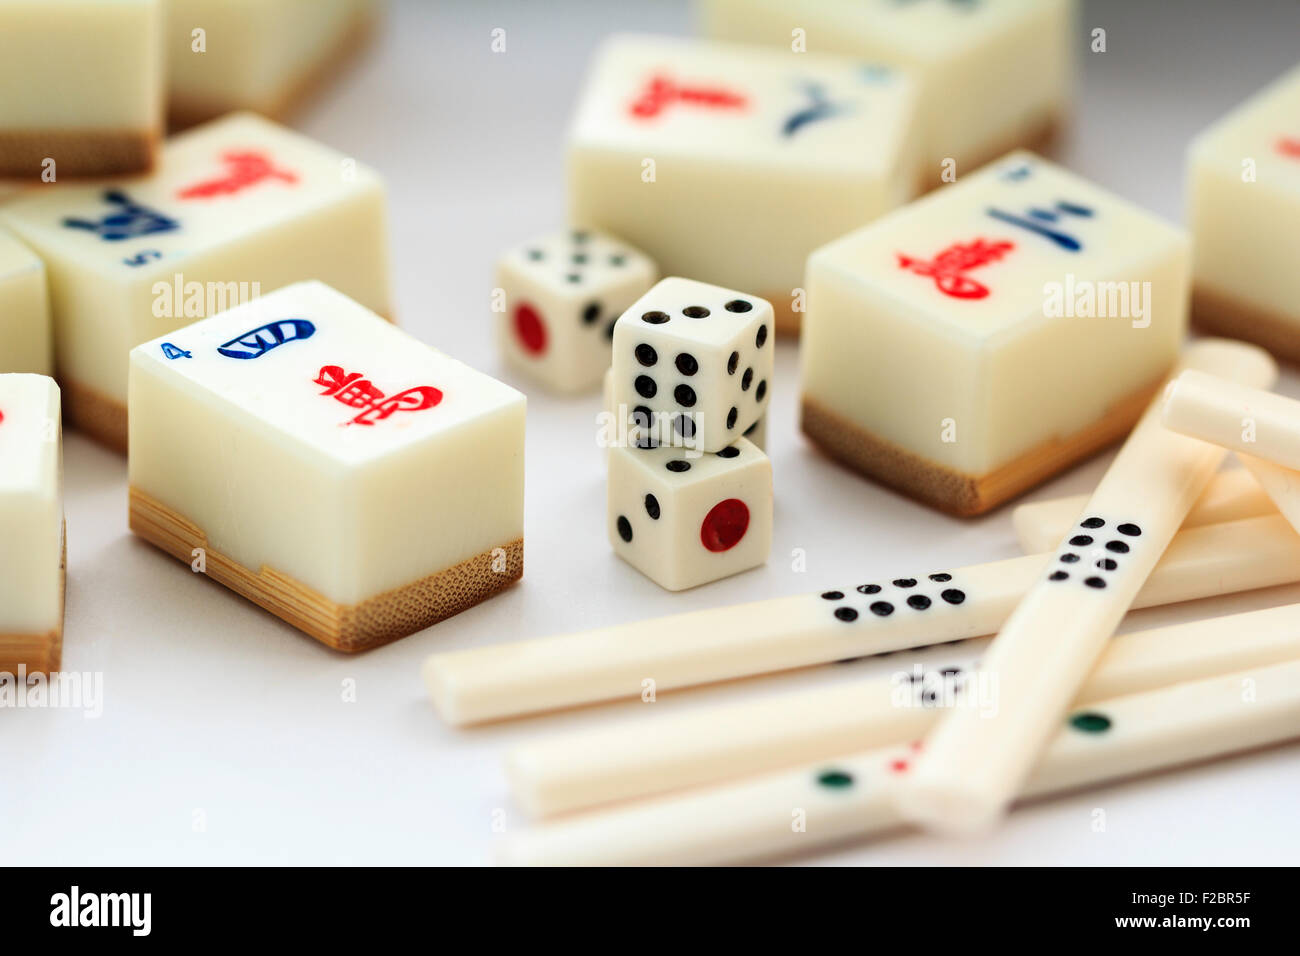 Mahjong, Mah jong gambling set. Various cards or tiles, dice and some counters laying on plain white background. Stock Photo